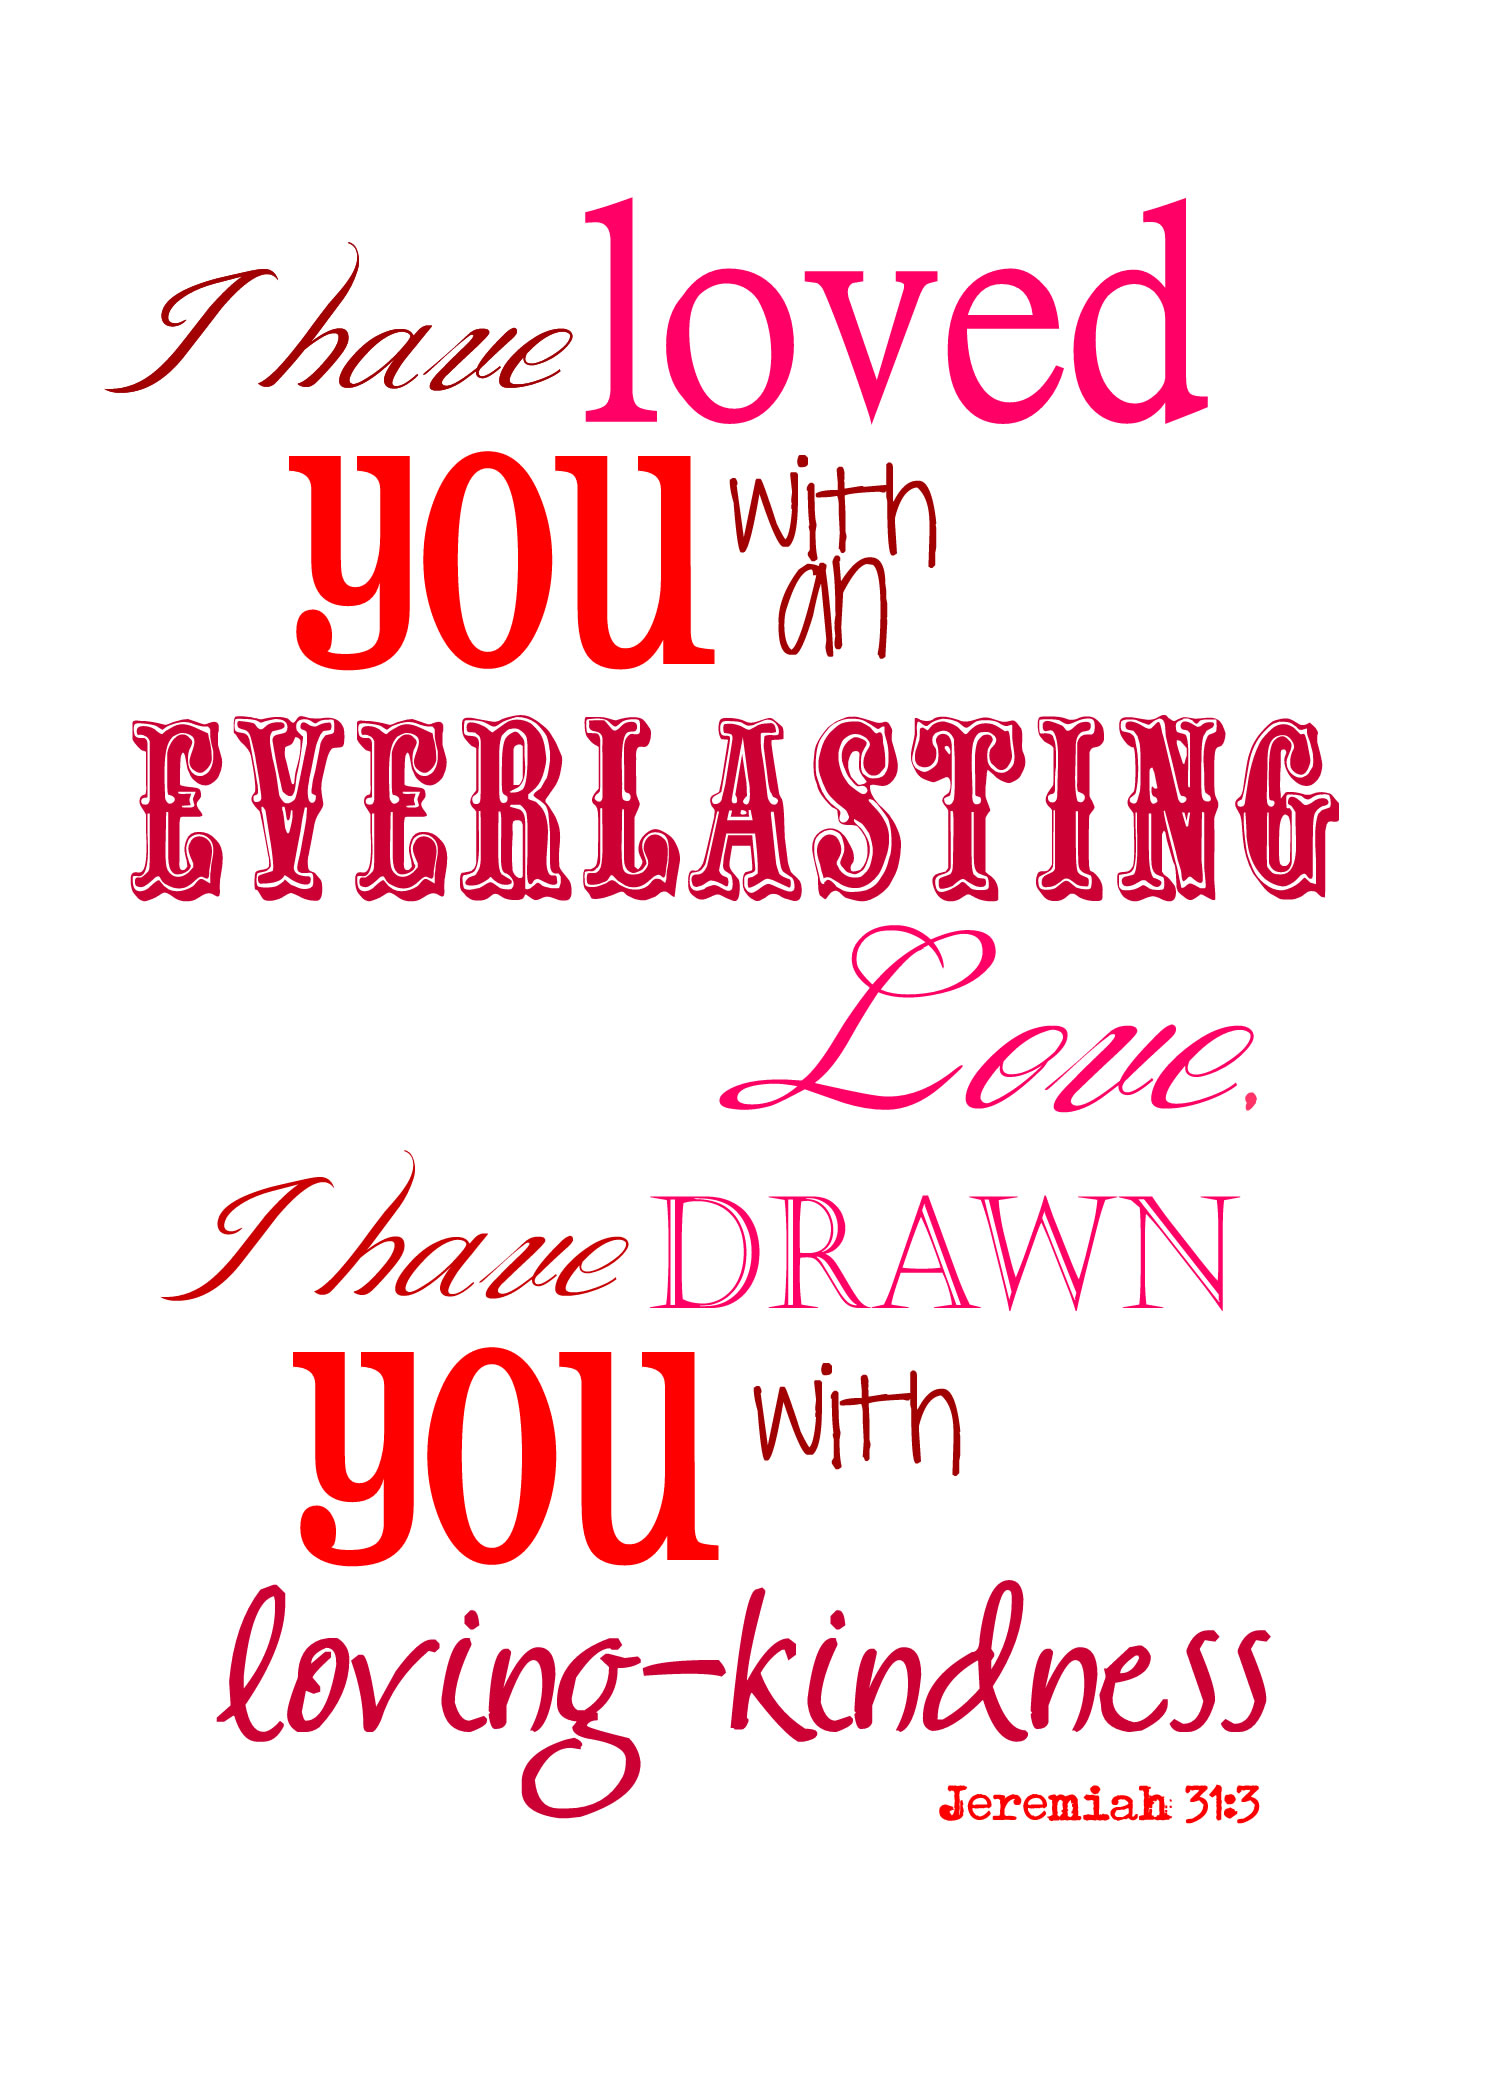 God Loves You   Free Printable To Share